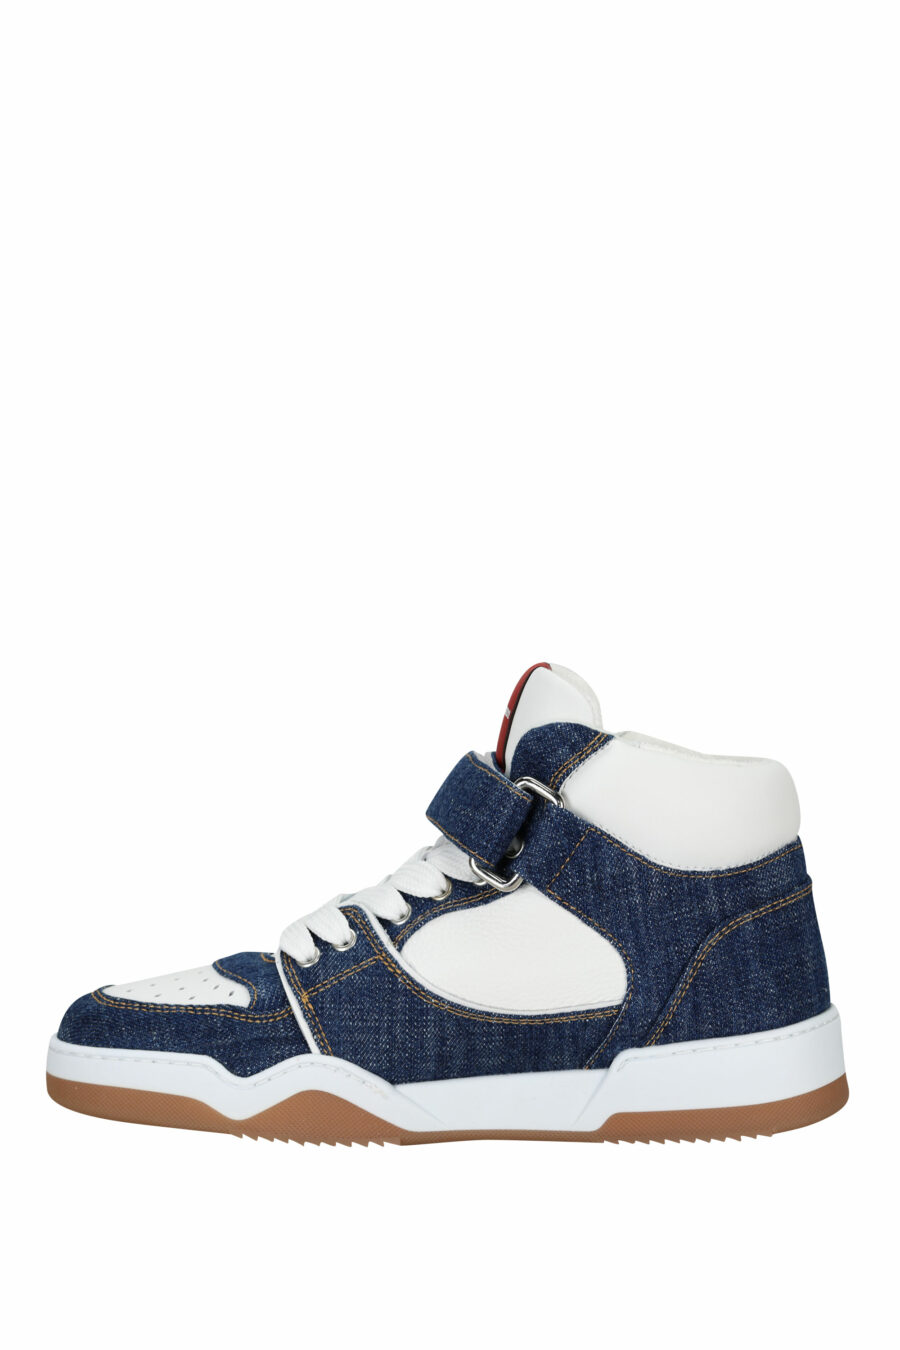 Blue denim "spyker" white high top trainers with logo - 8055777306079 2